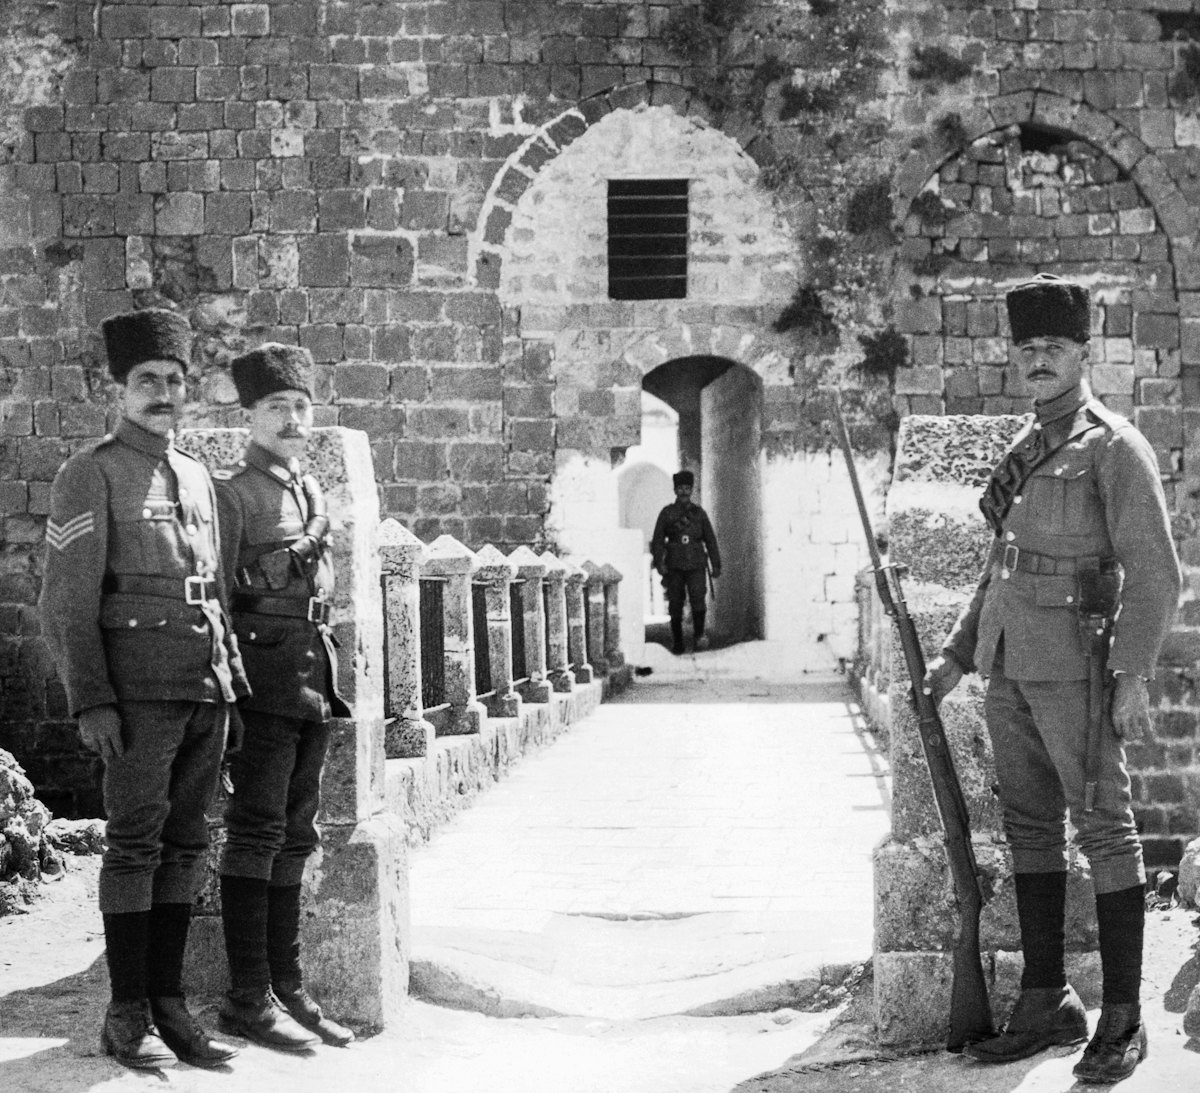 This photo, taken around 1900, shows prison guards in front of the barracks, where Baha’u’llah was taken as a prisoner on 31 August 1868.